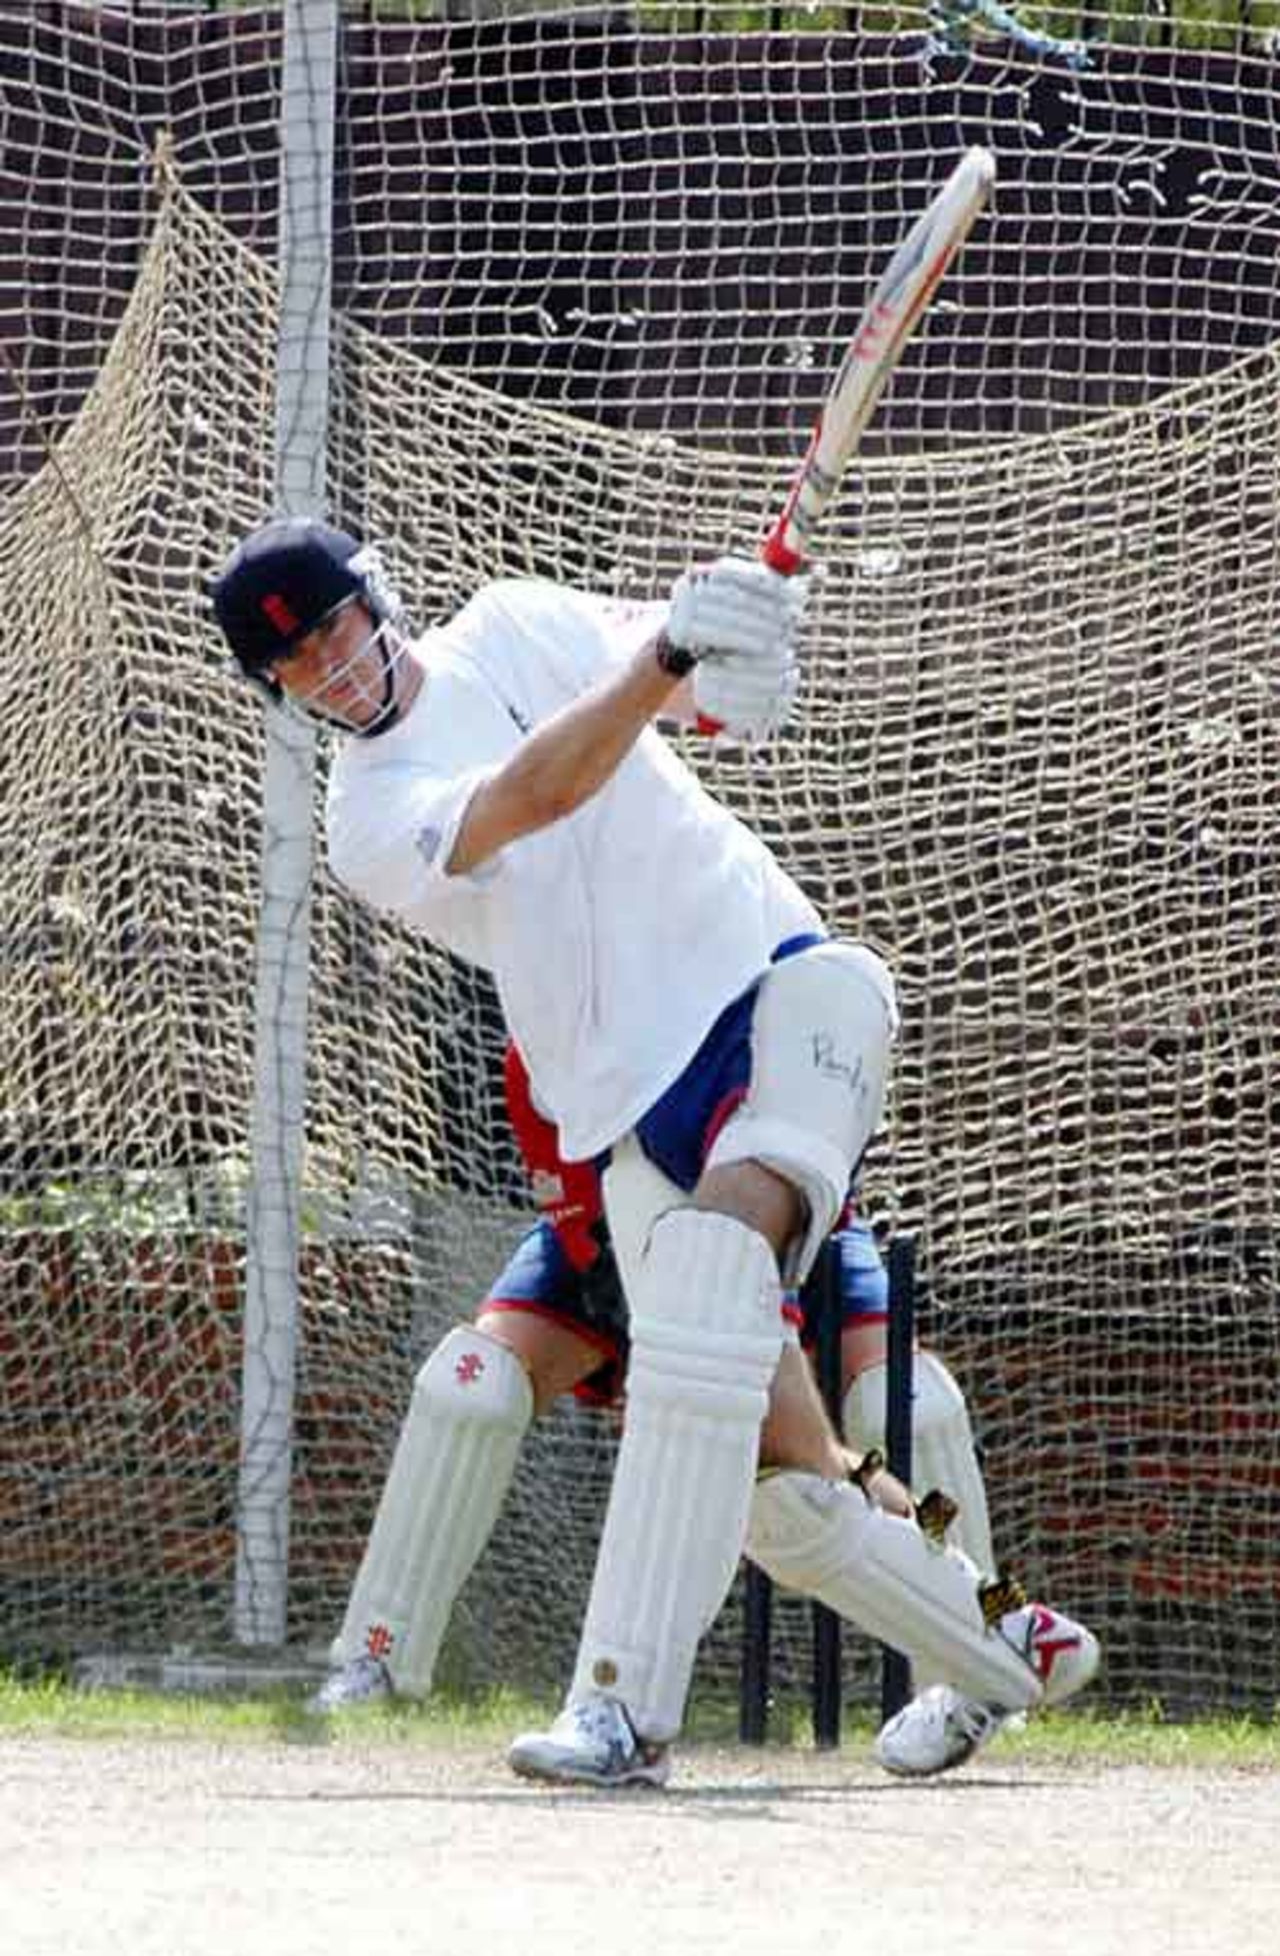 Will Jefferson launches one out of the nets, Sher-e-Bangla National Cricket Stadium, February 16, 2007